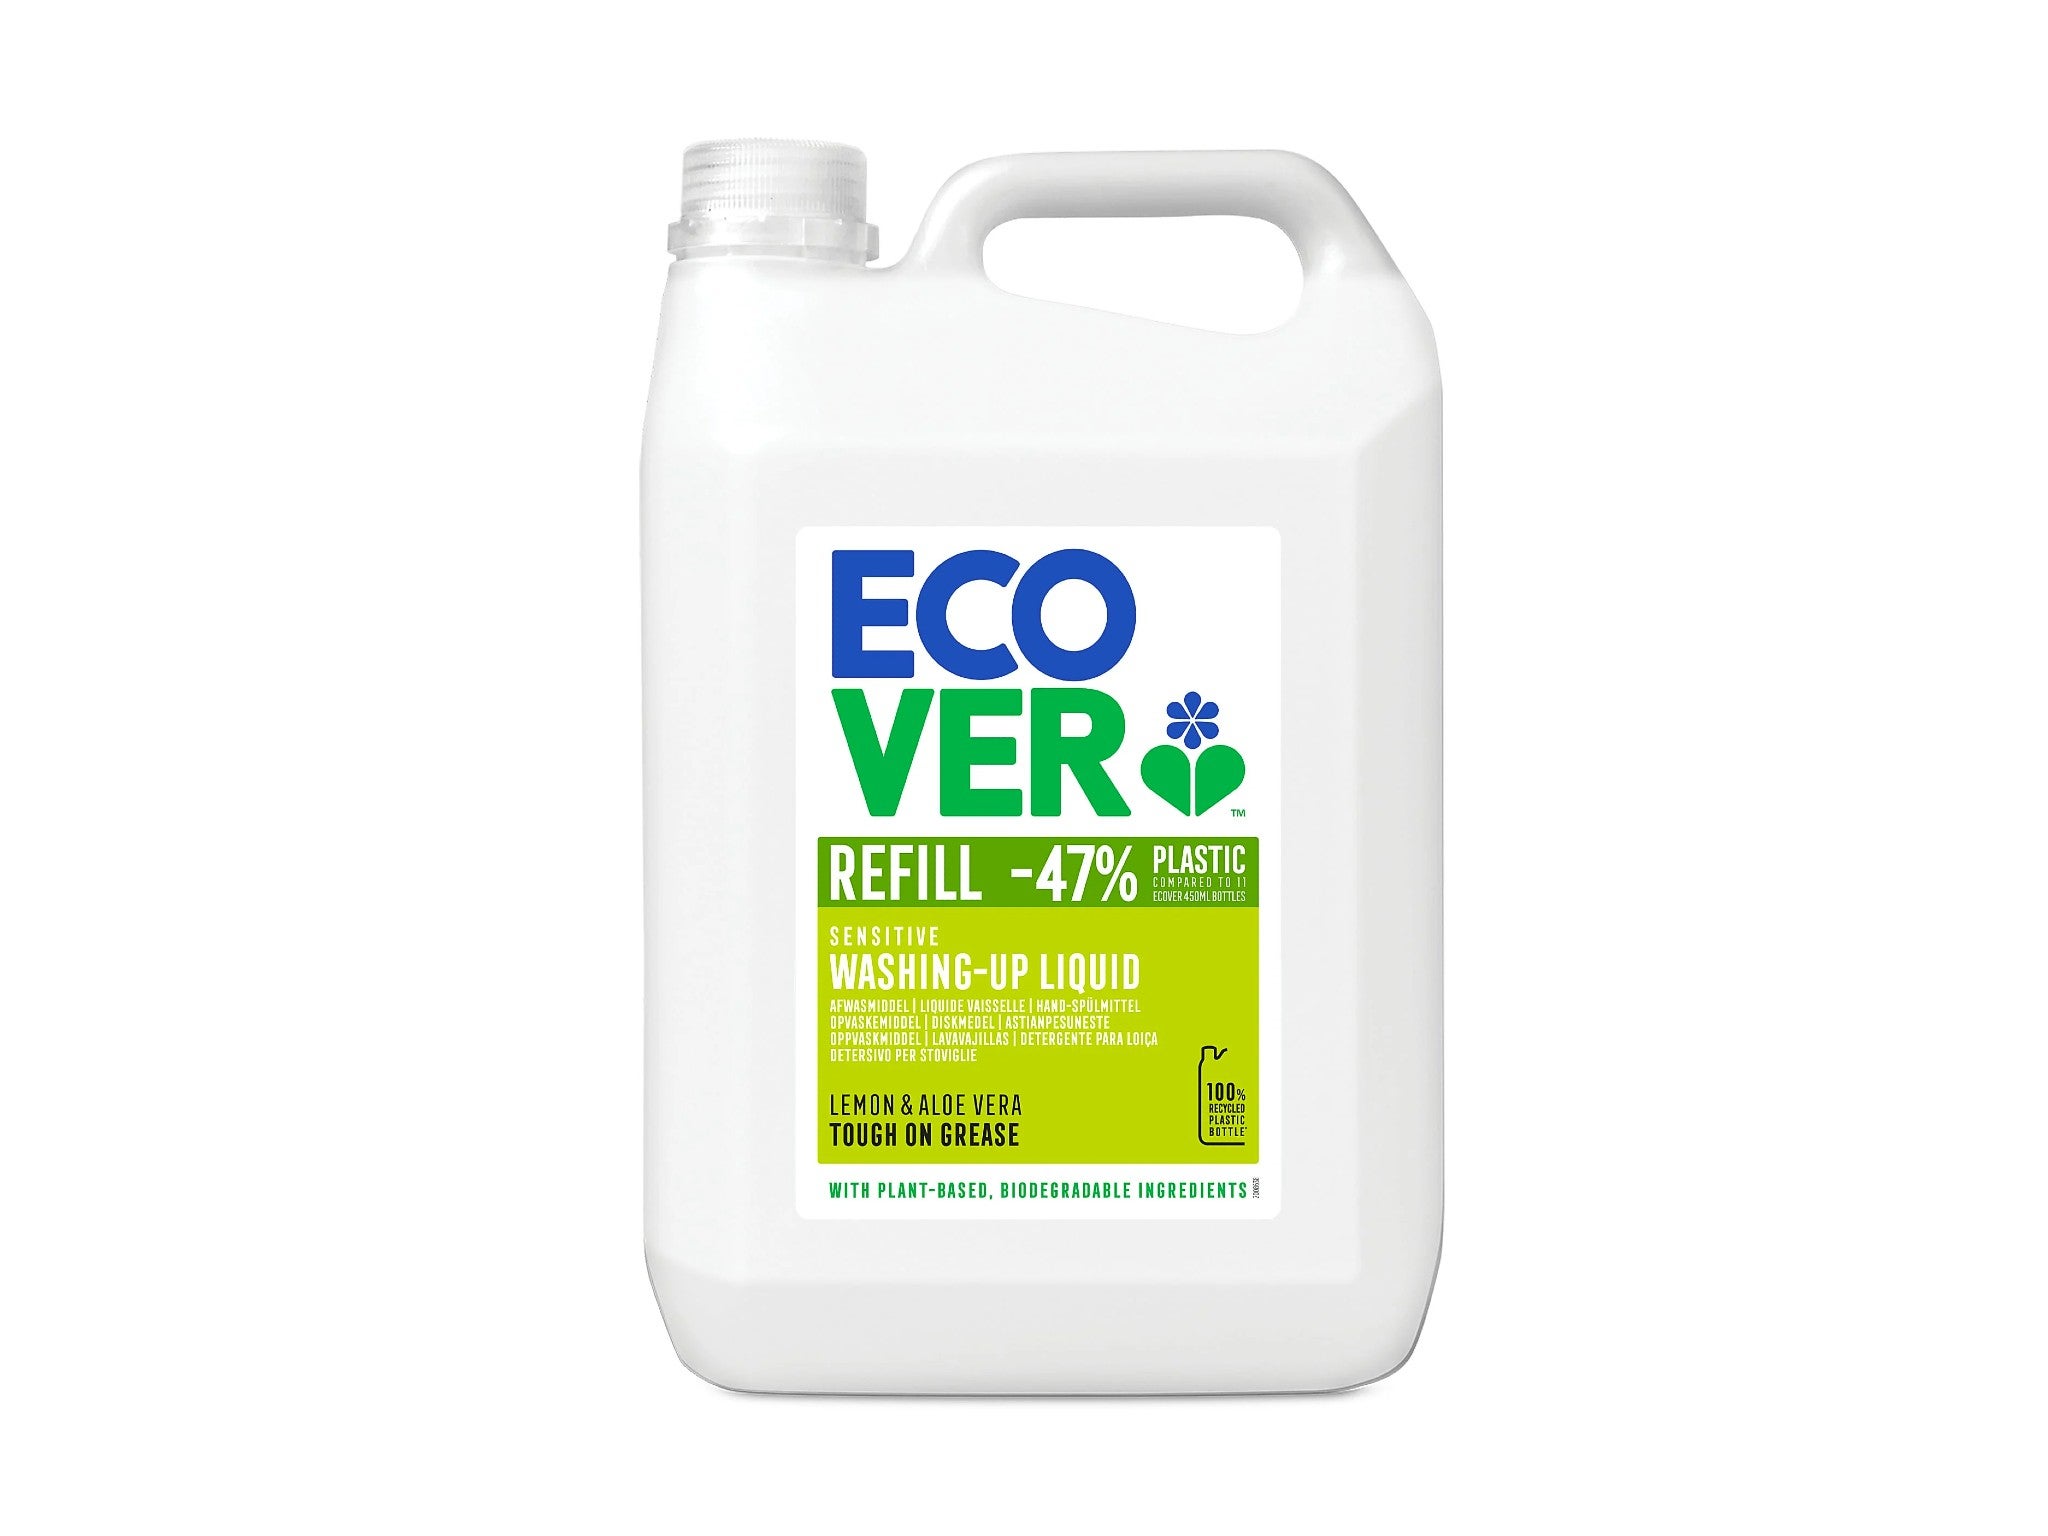 Ecover washing-up liquid lemon and aloe vera refill, 5l indybest